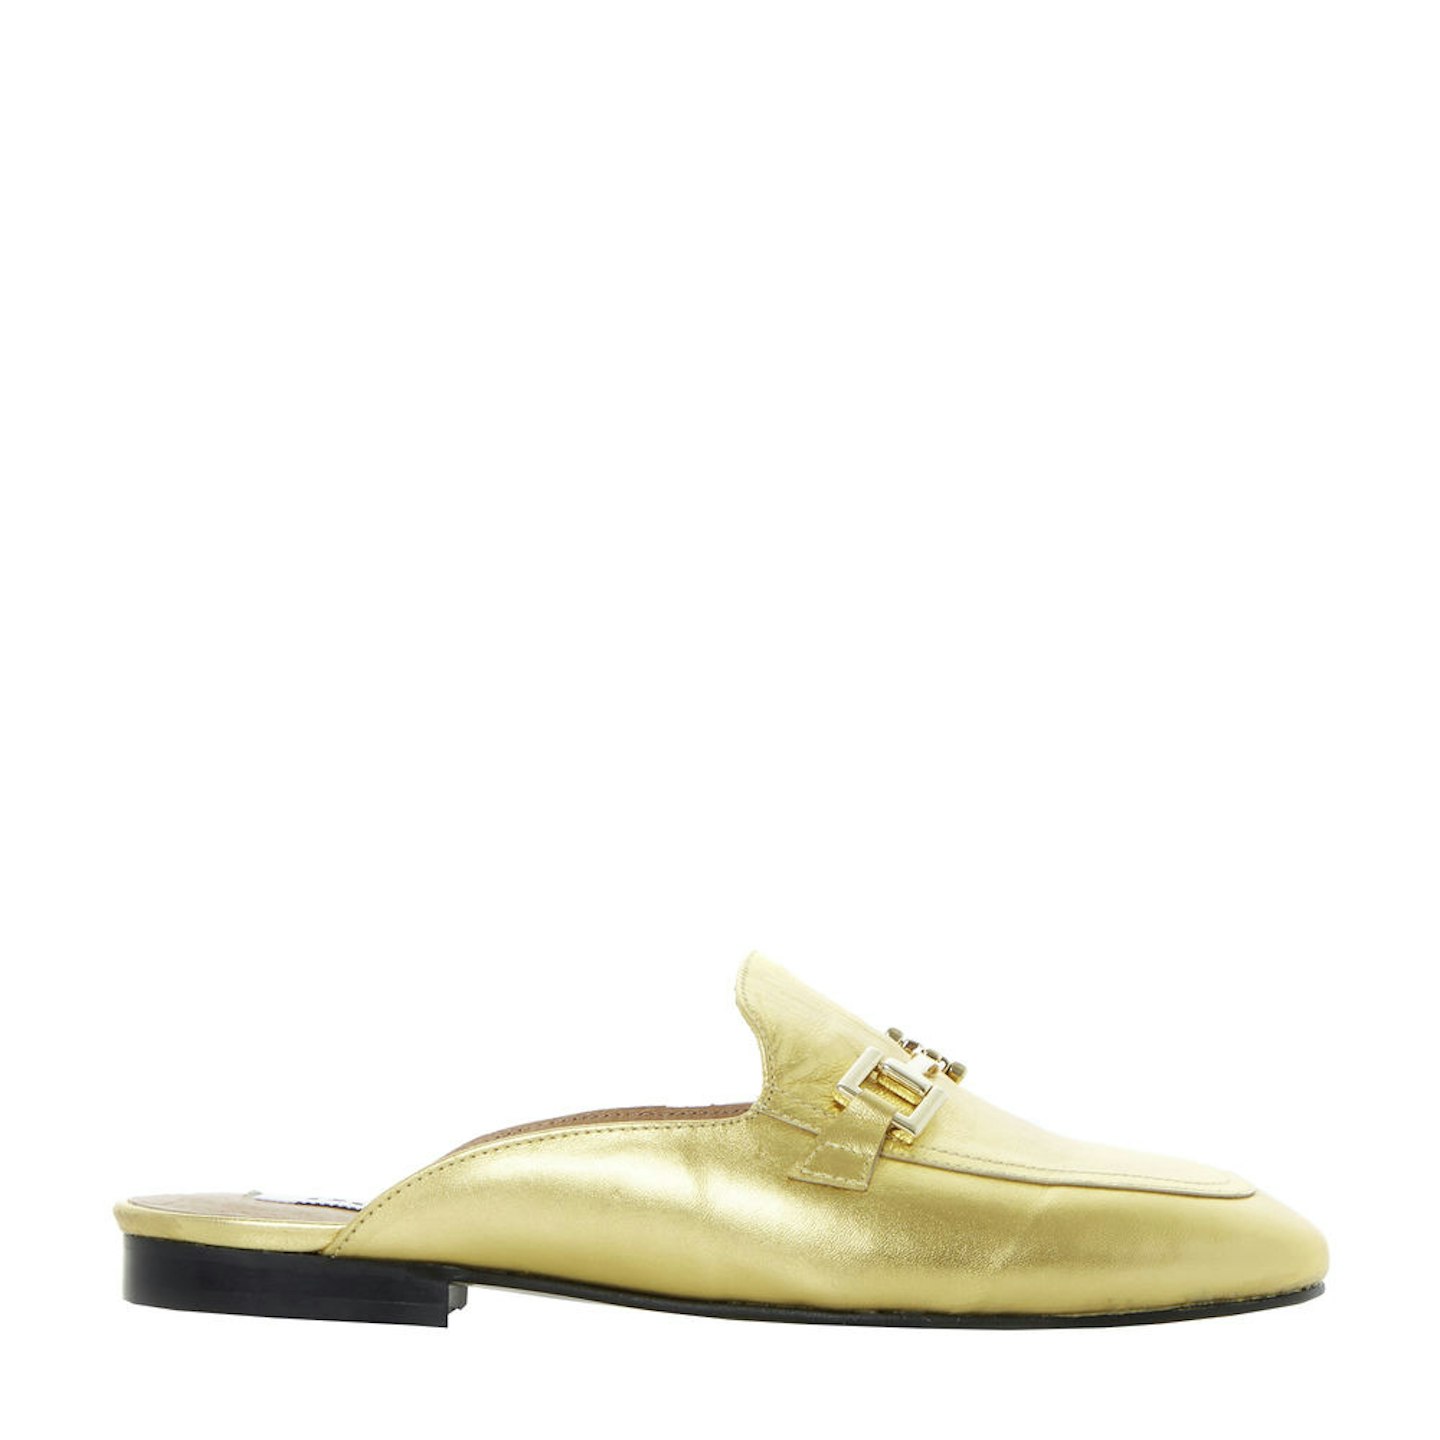 Gold slippers from Dune